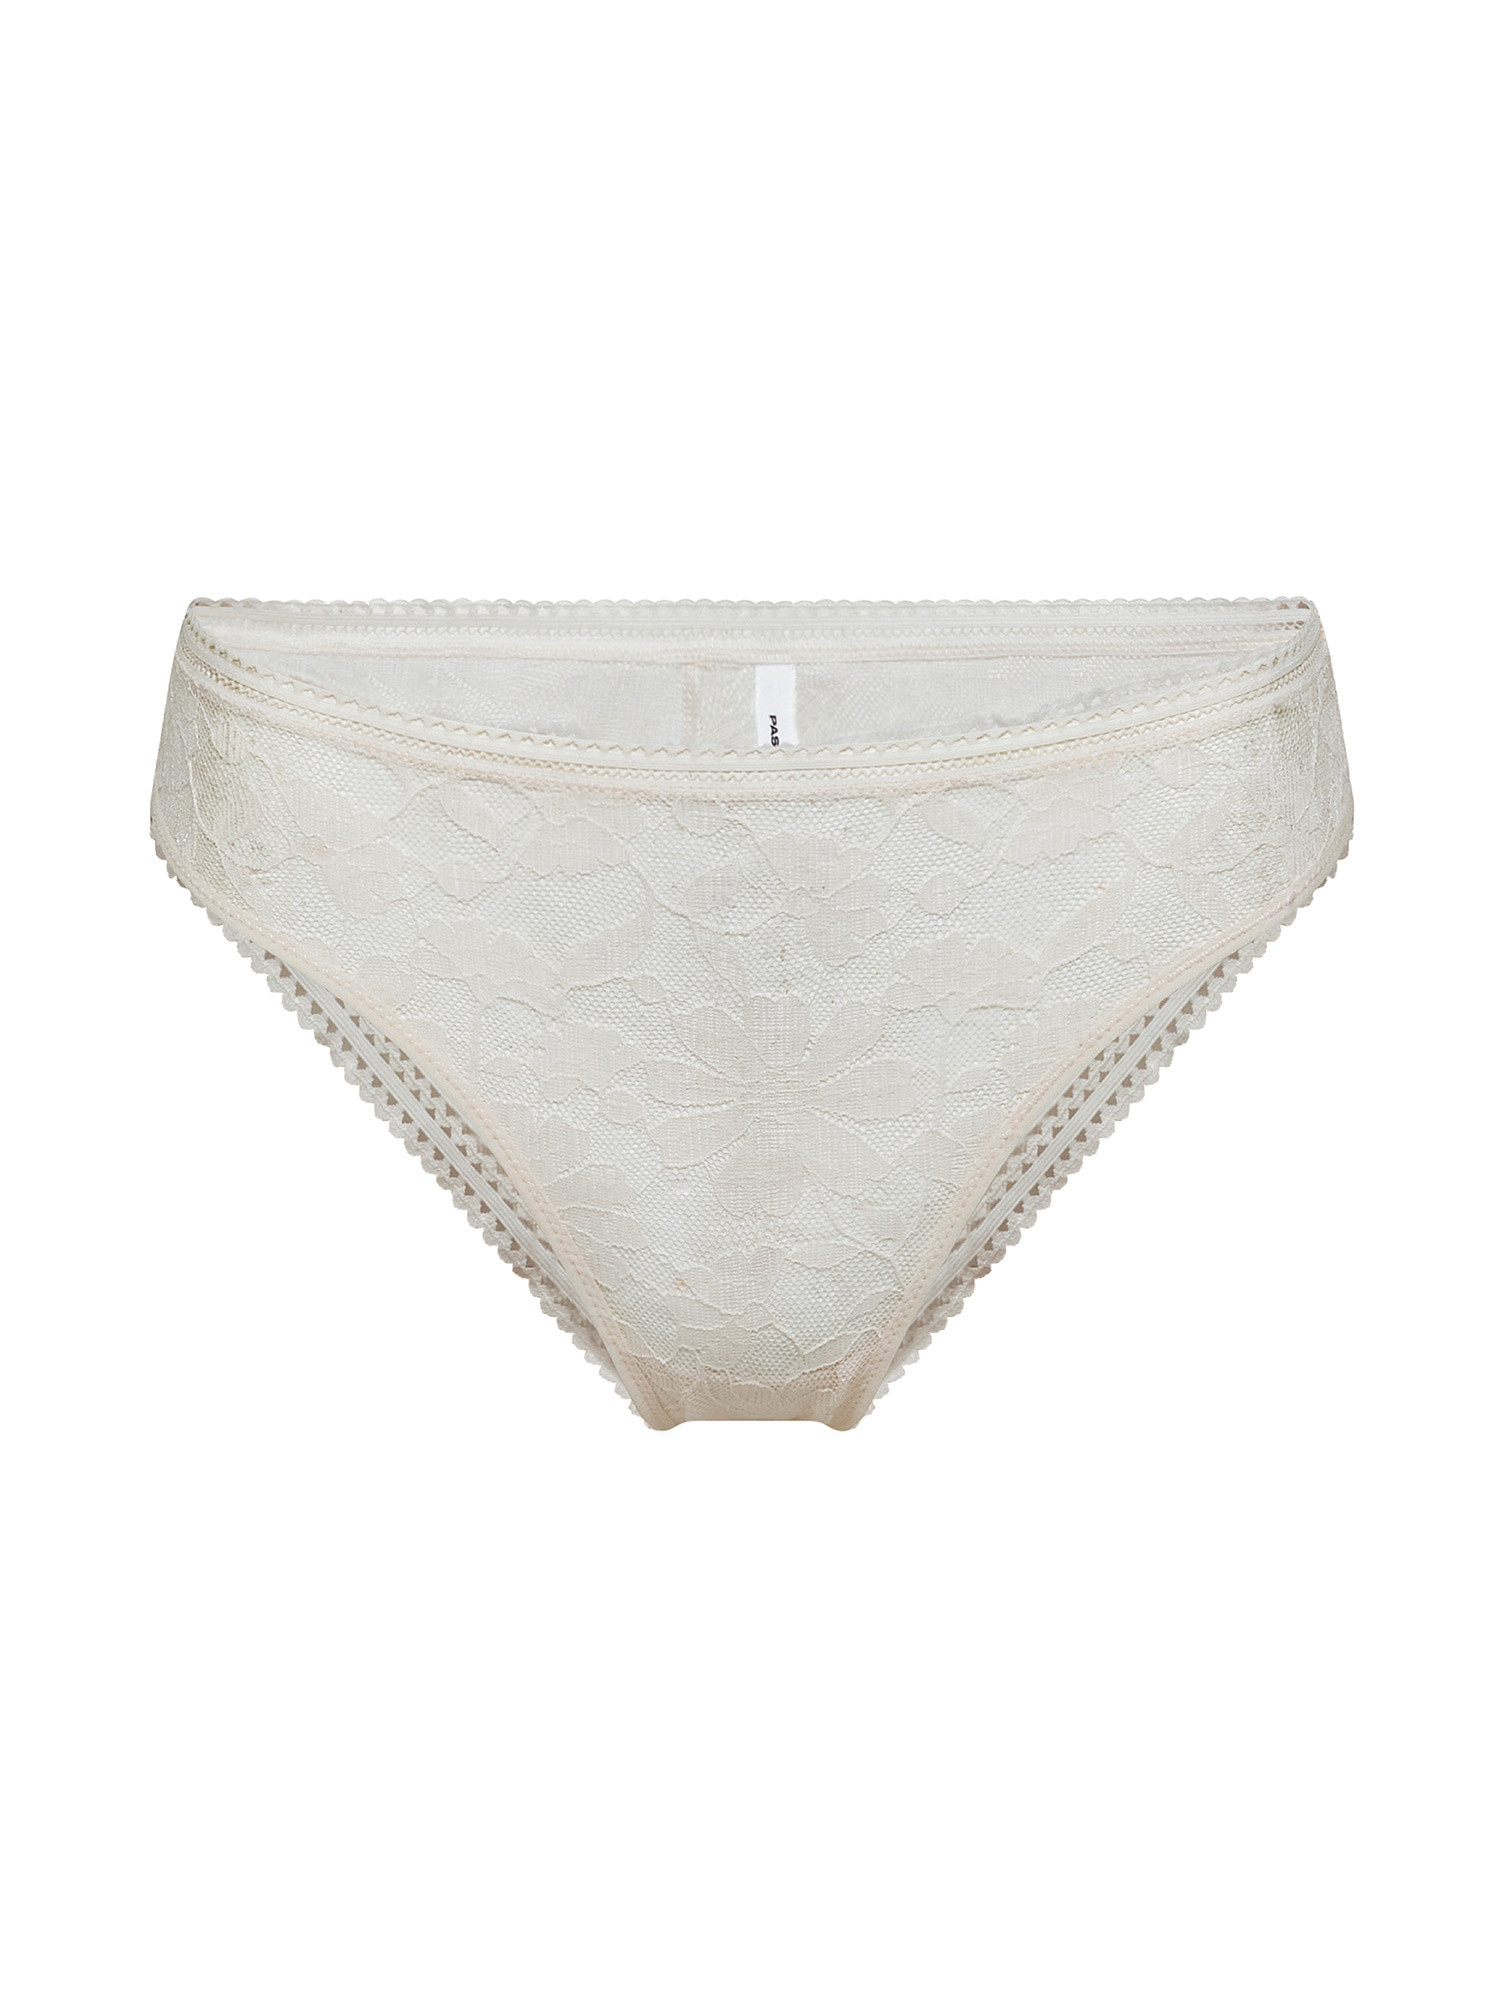 Lace thong, White Cream, large image number 0